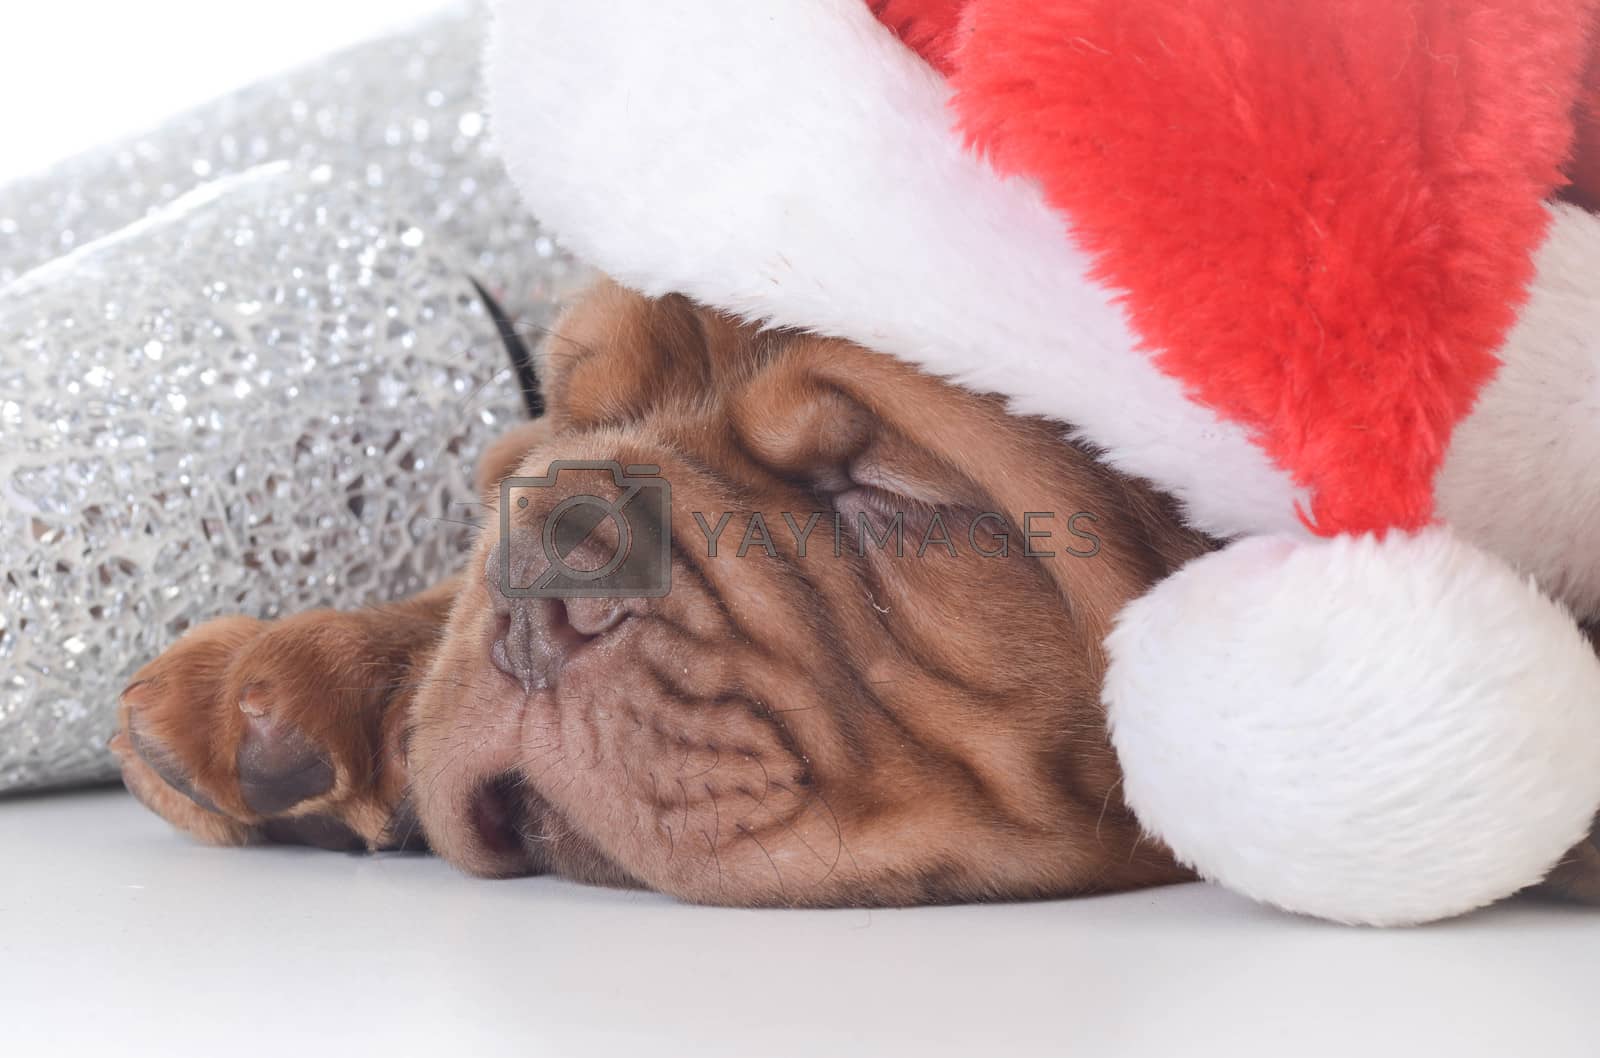 Royalty free image of christmas puppy by willeecole123